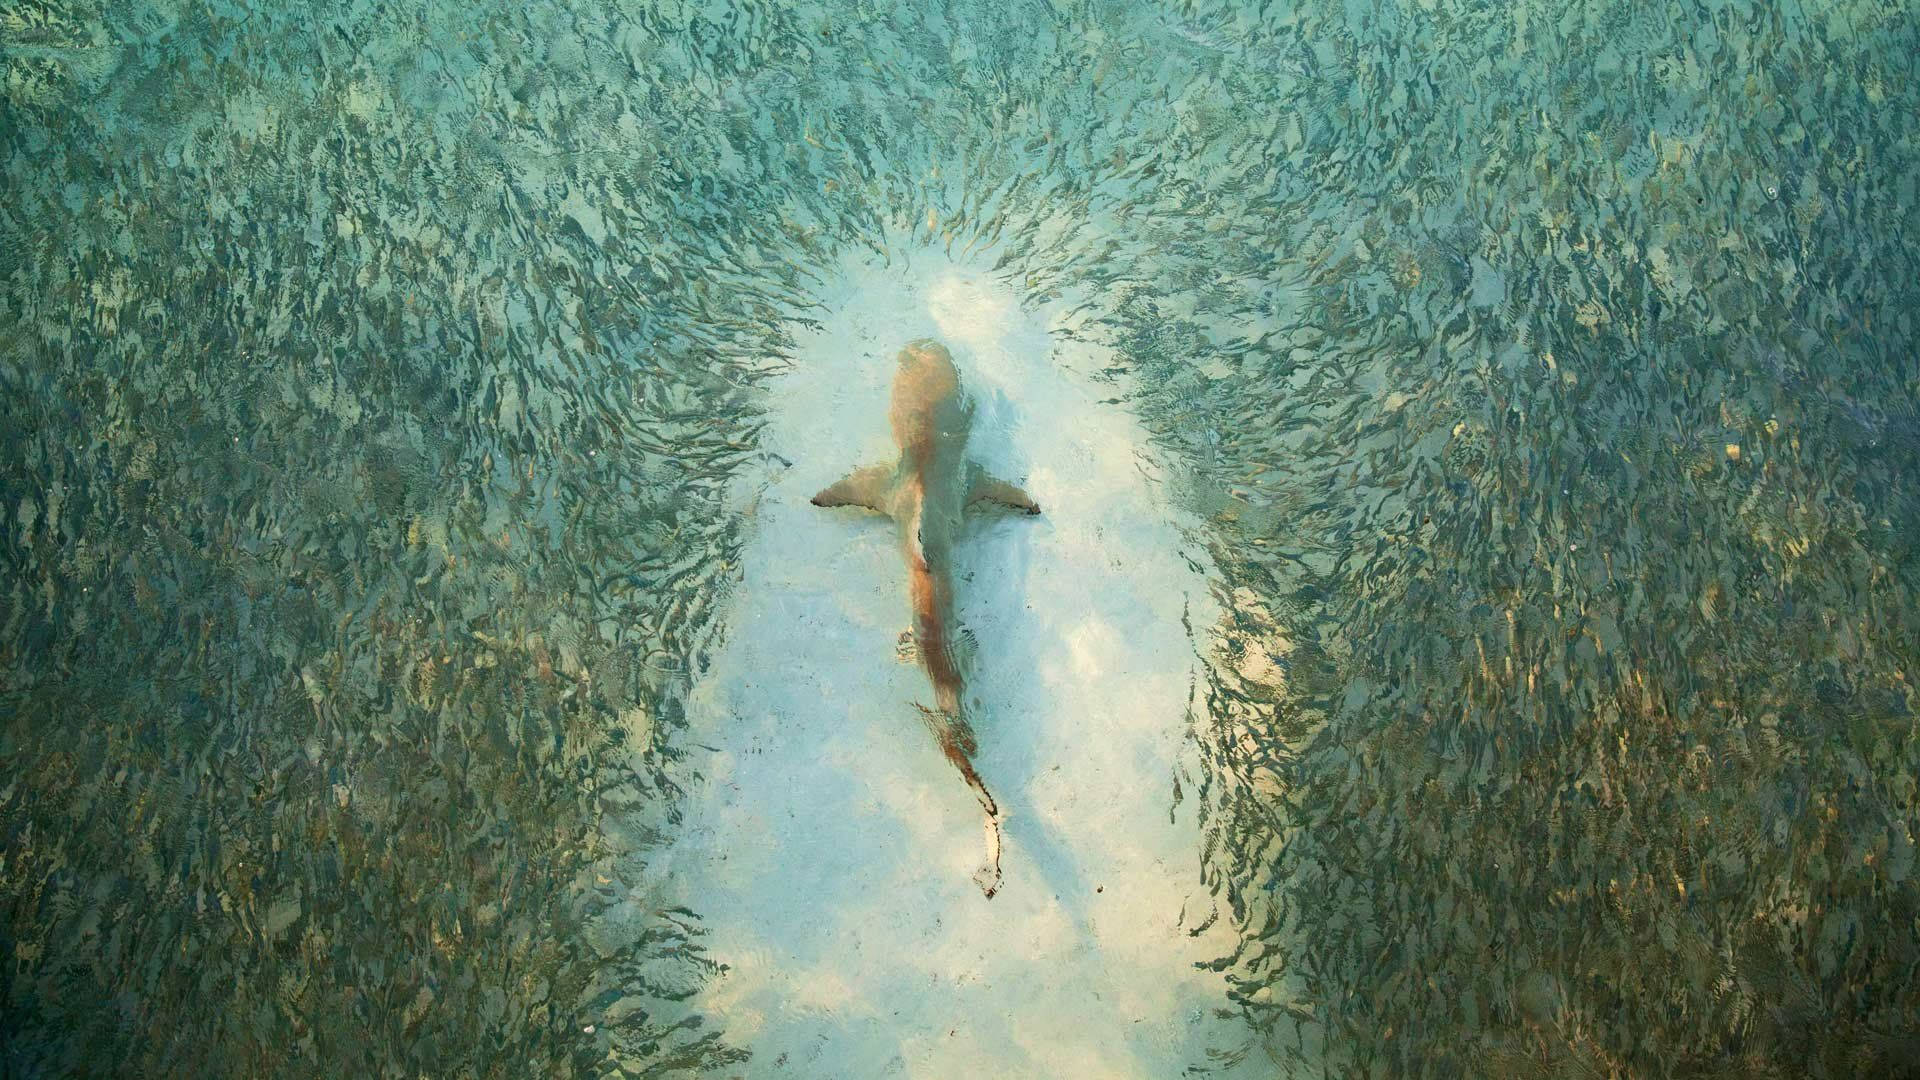 A mother shark watches over her pups in the beautiful clear ocean Wallpaper